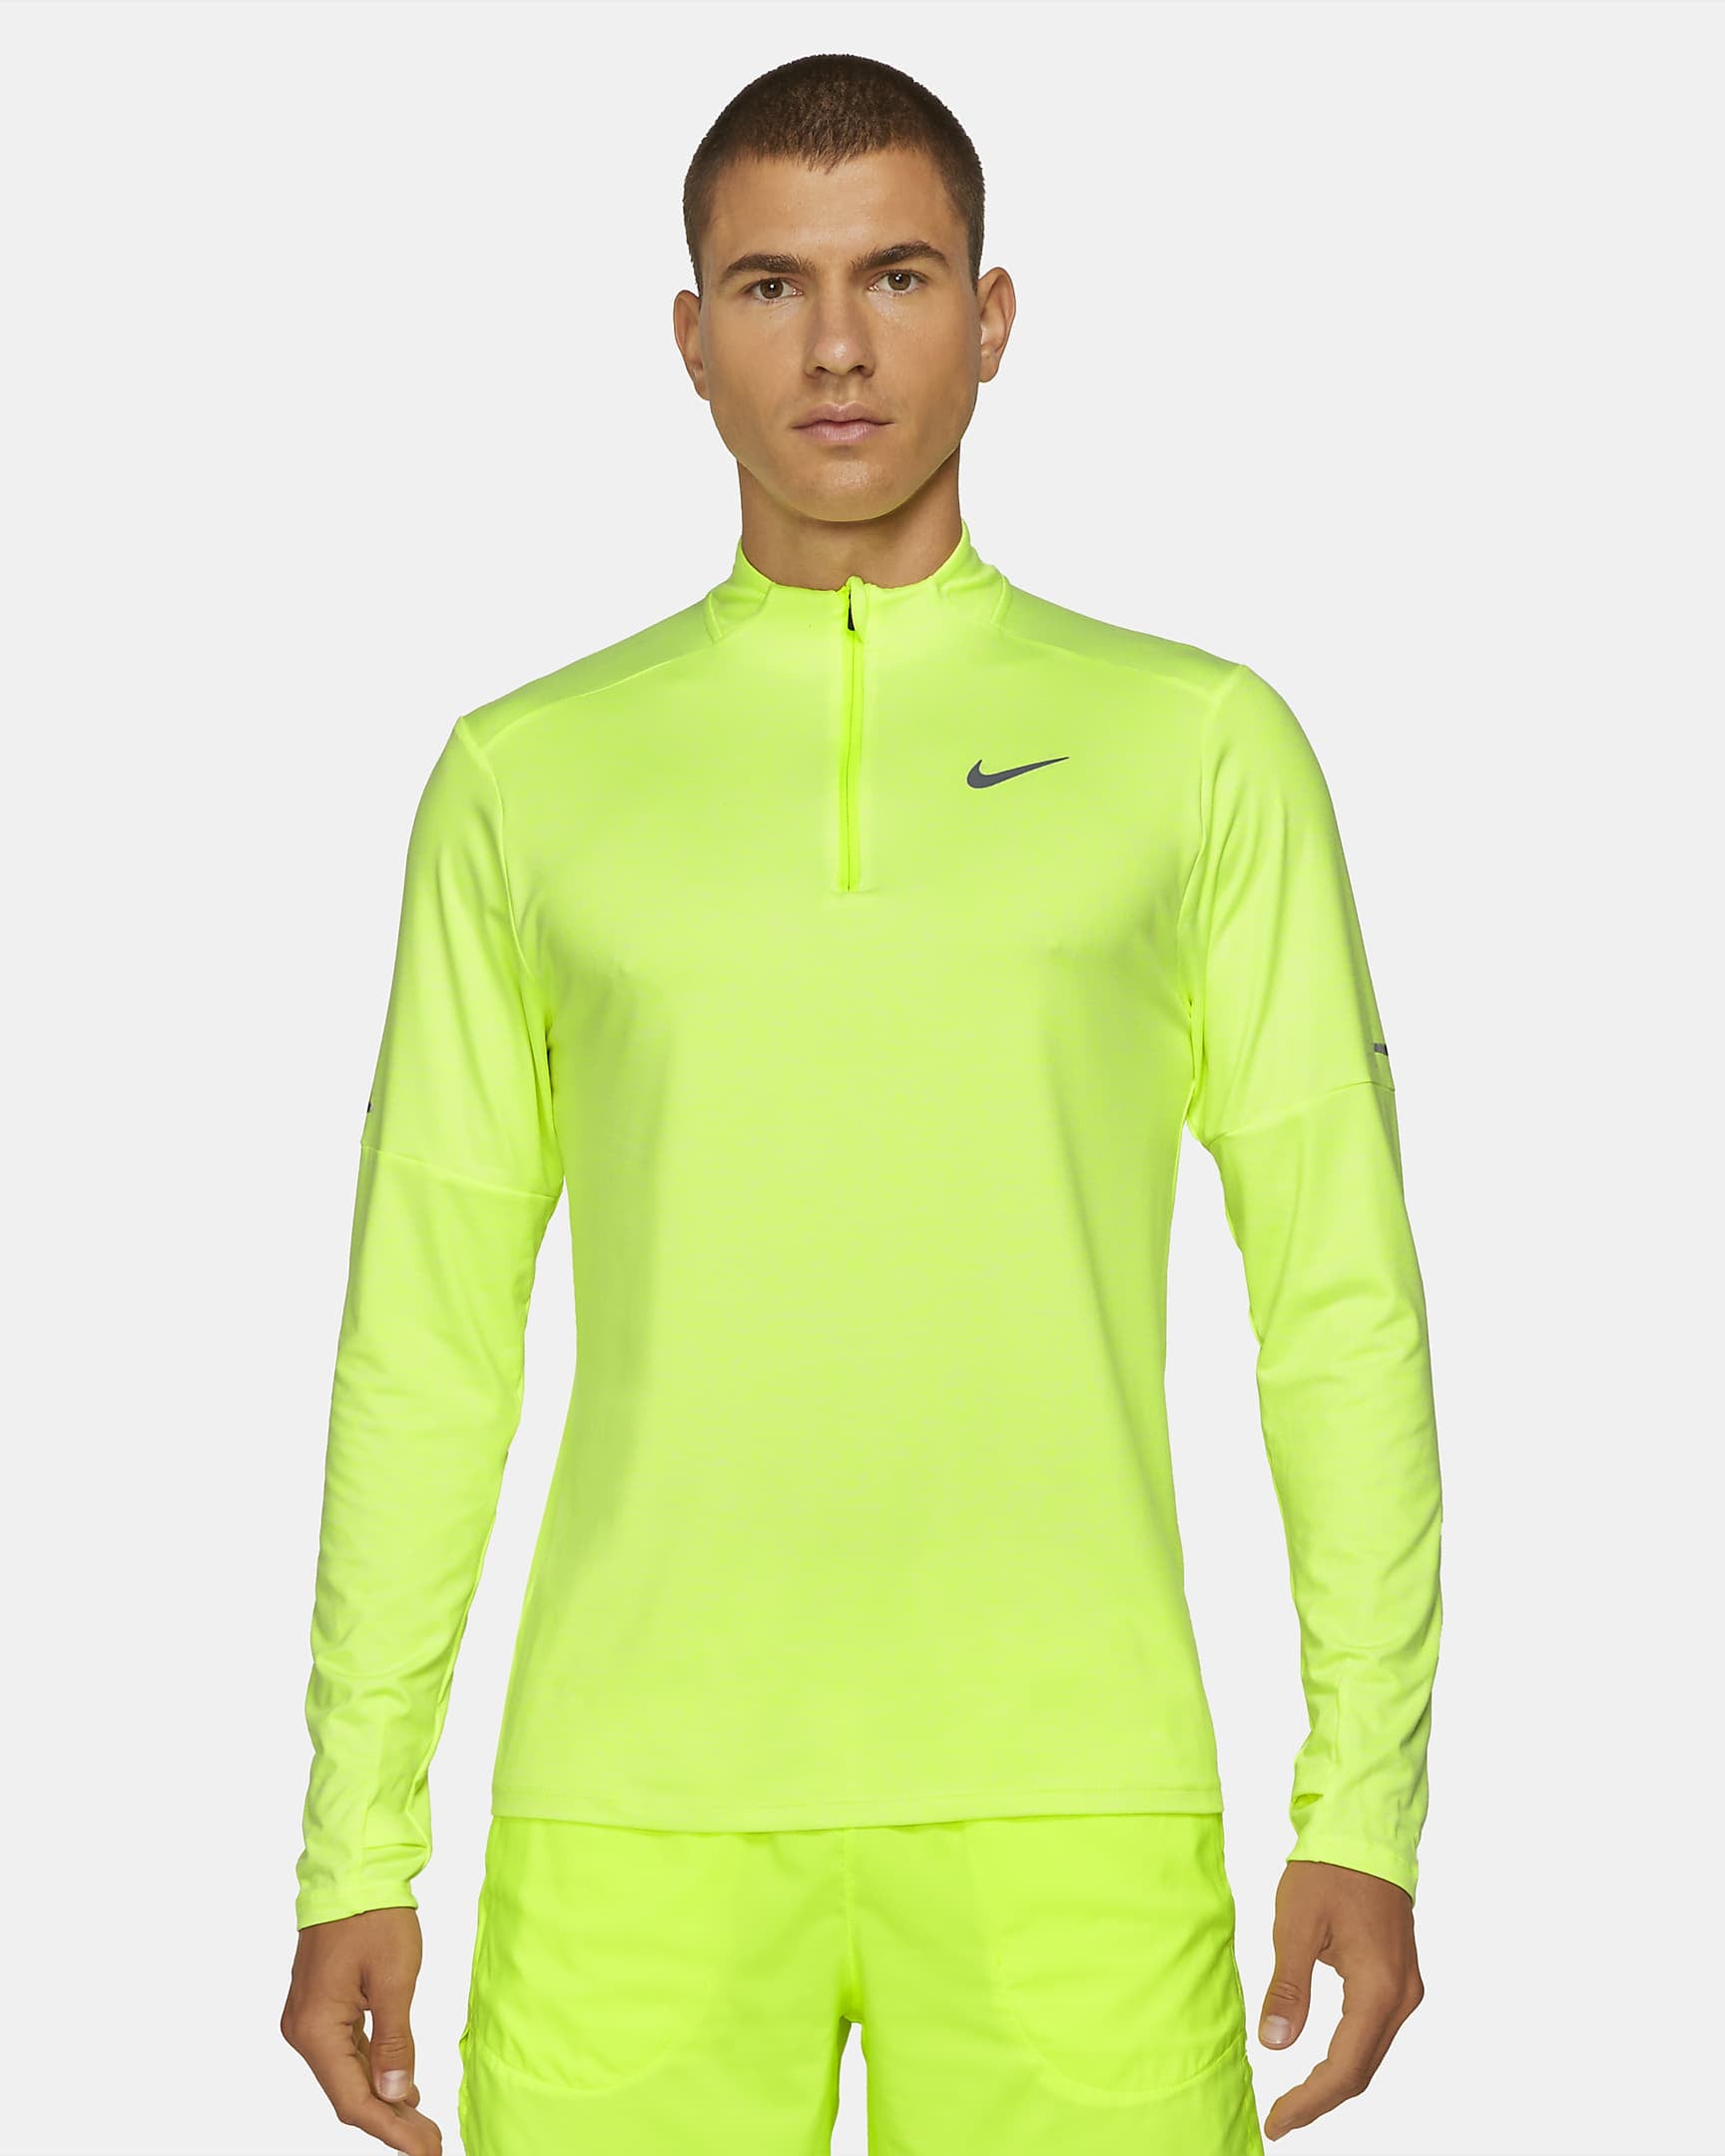 Nike Men's Dri-Fit Element 1/4 Zip Yellow – All About Tennis